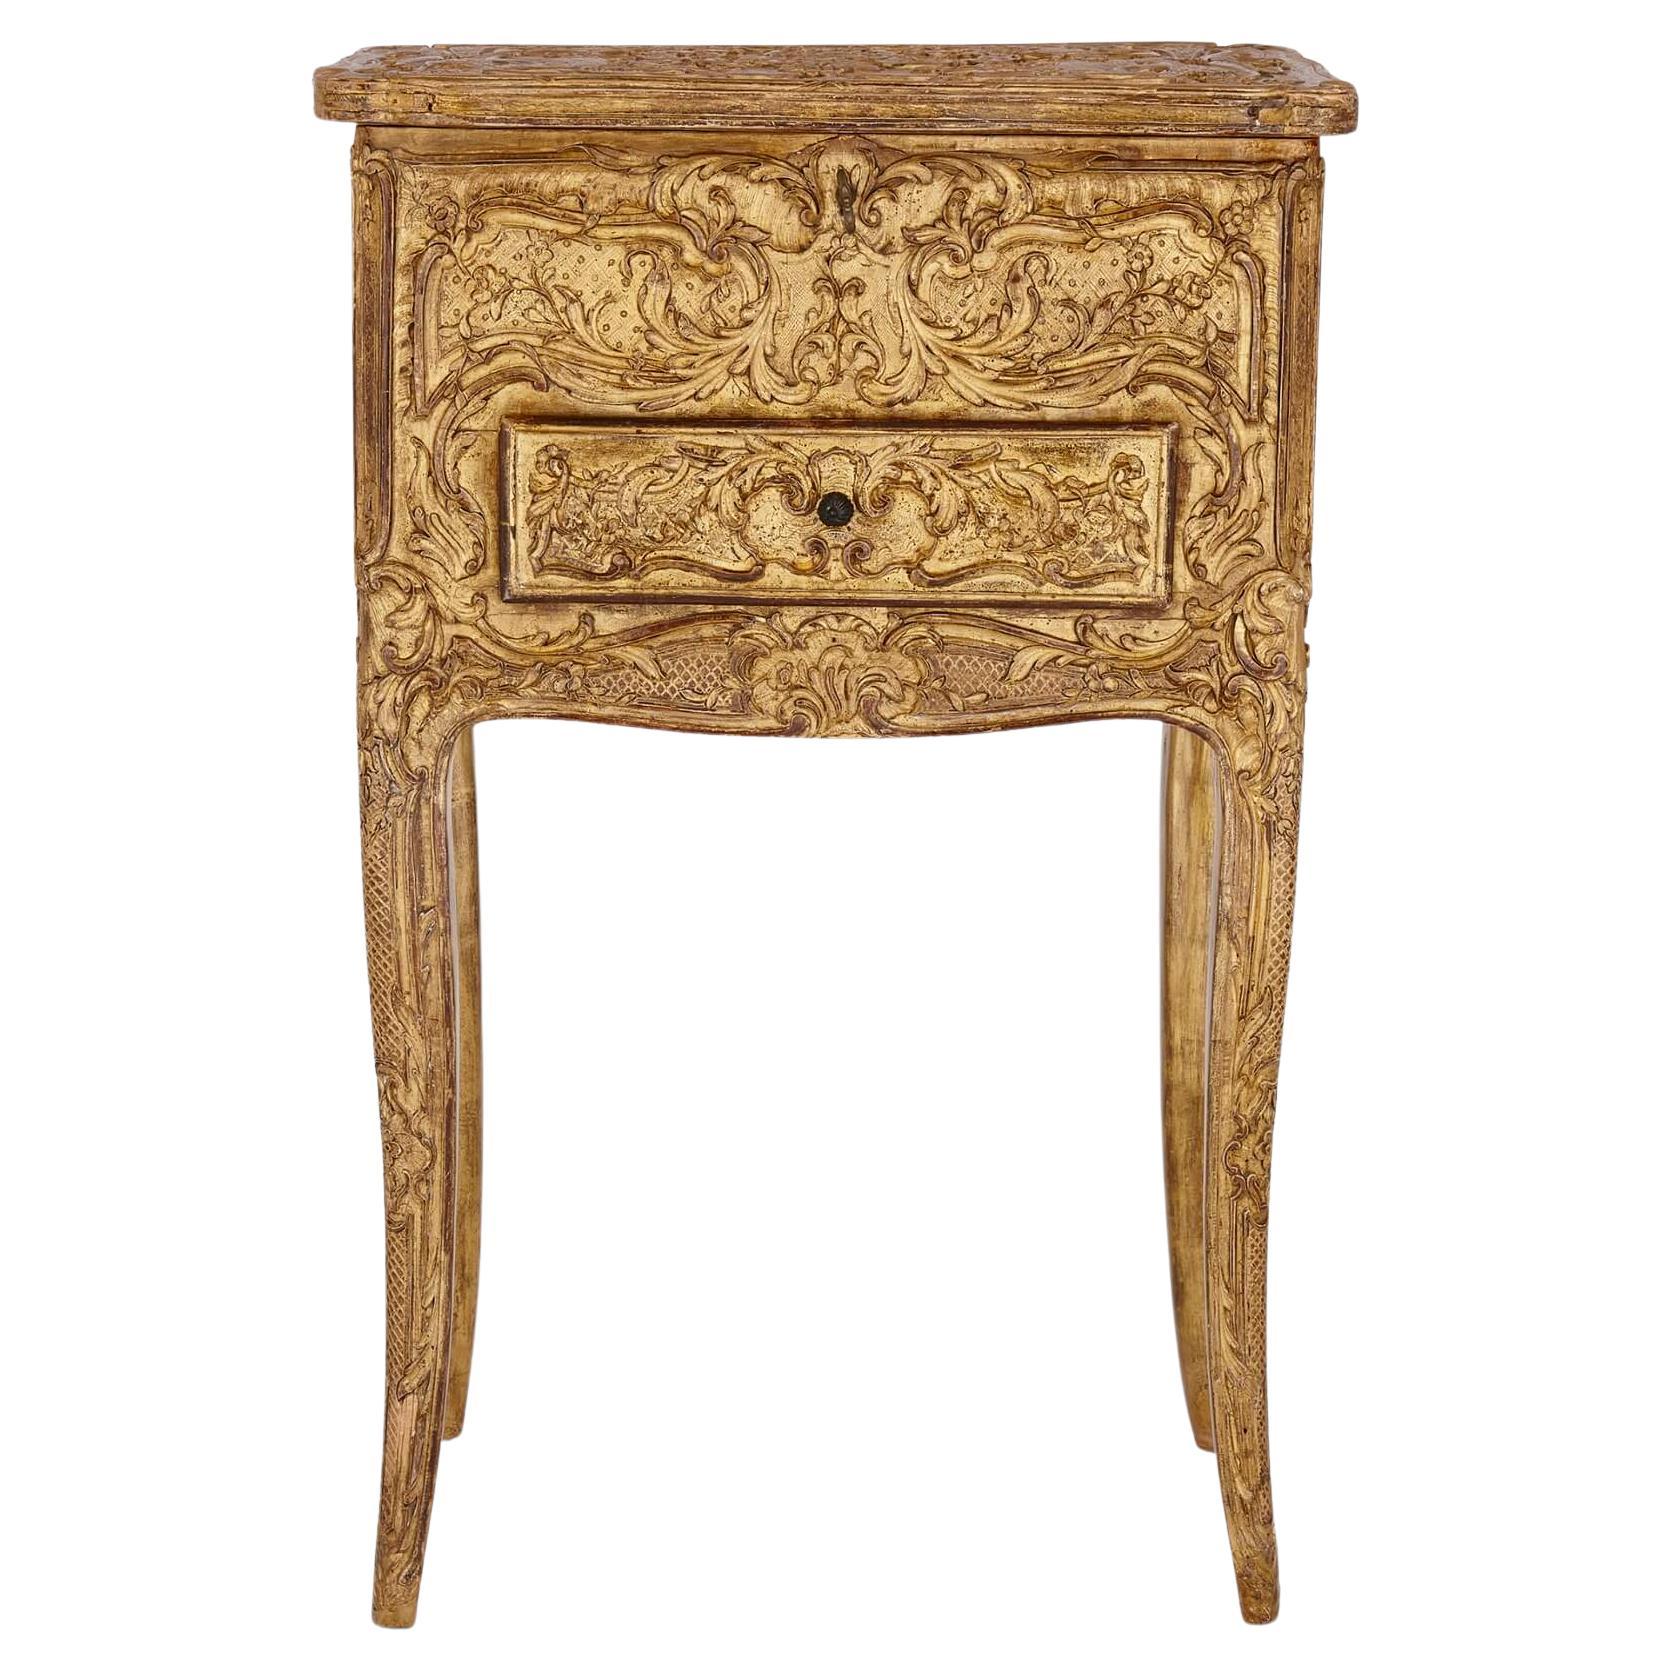 French Régence Period Carved Giltwood Table with Mirror, Early 18th Century For Sale